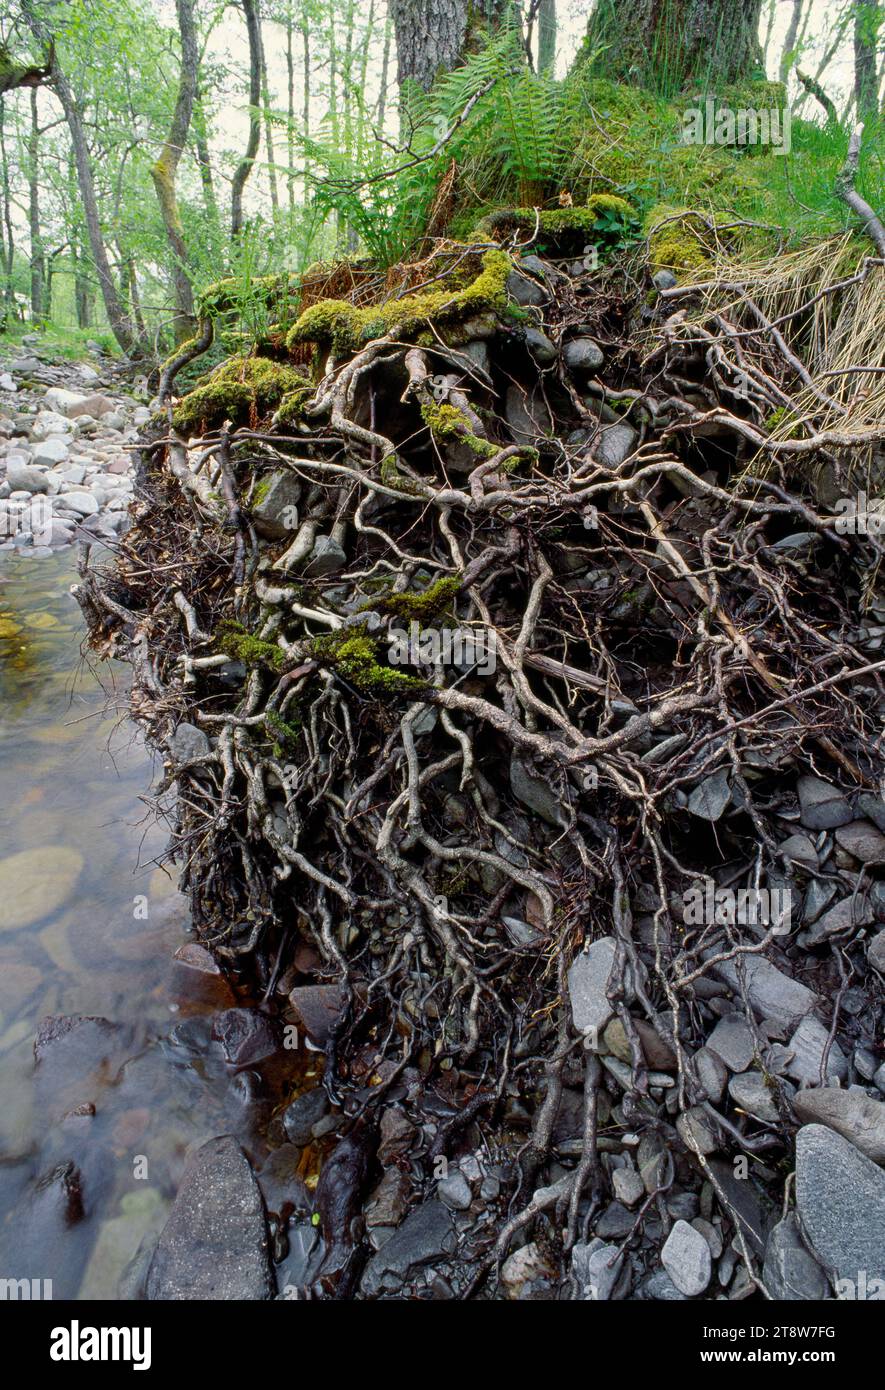 Alder (Alnus glutinosa) showing exposed root system of tree growing in the bank of the river Spean, Lochaber, Scotland, June 1998 Stock Photo